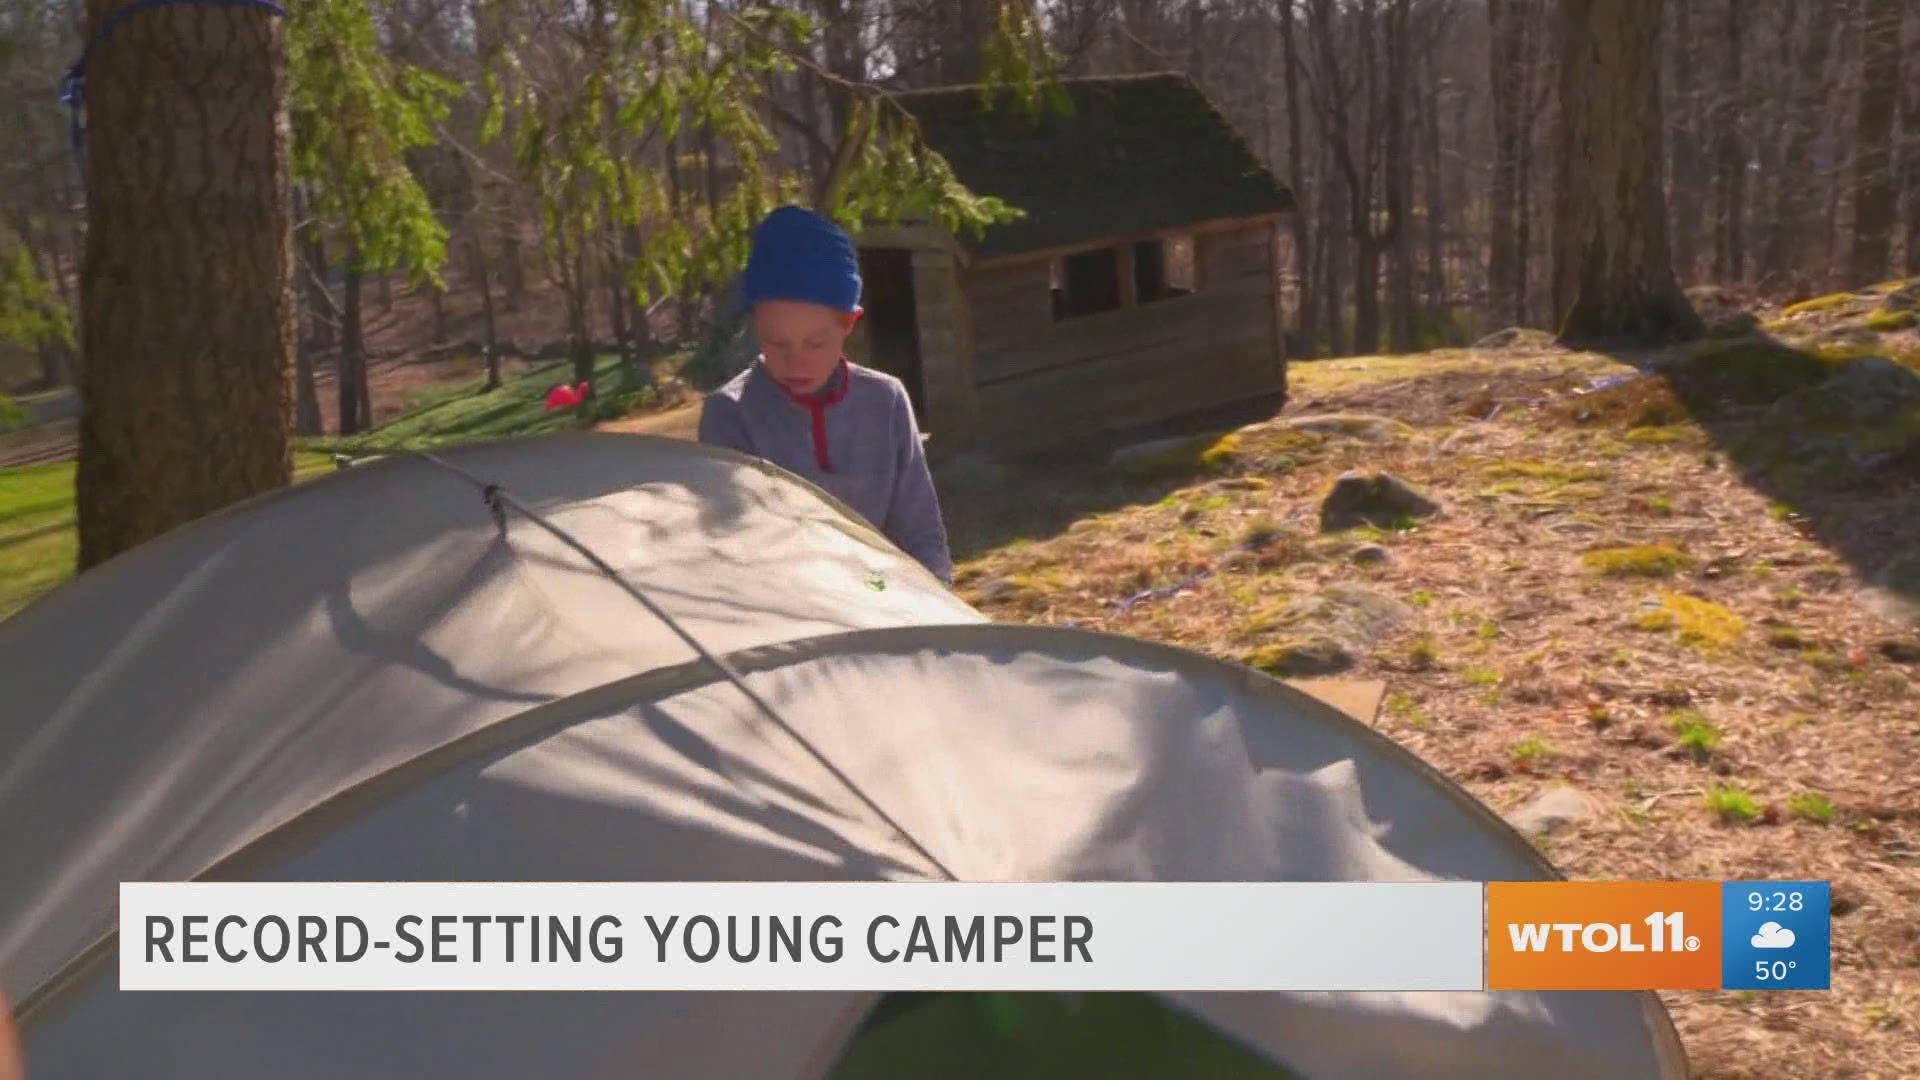 13-year-old Boy Scout William Olmstead slept in a tent in his backyard for a year and a day, setting a record!